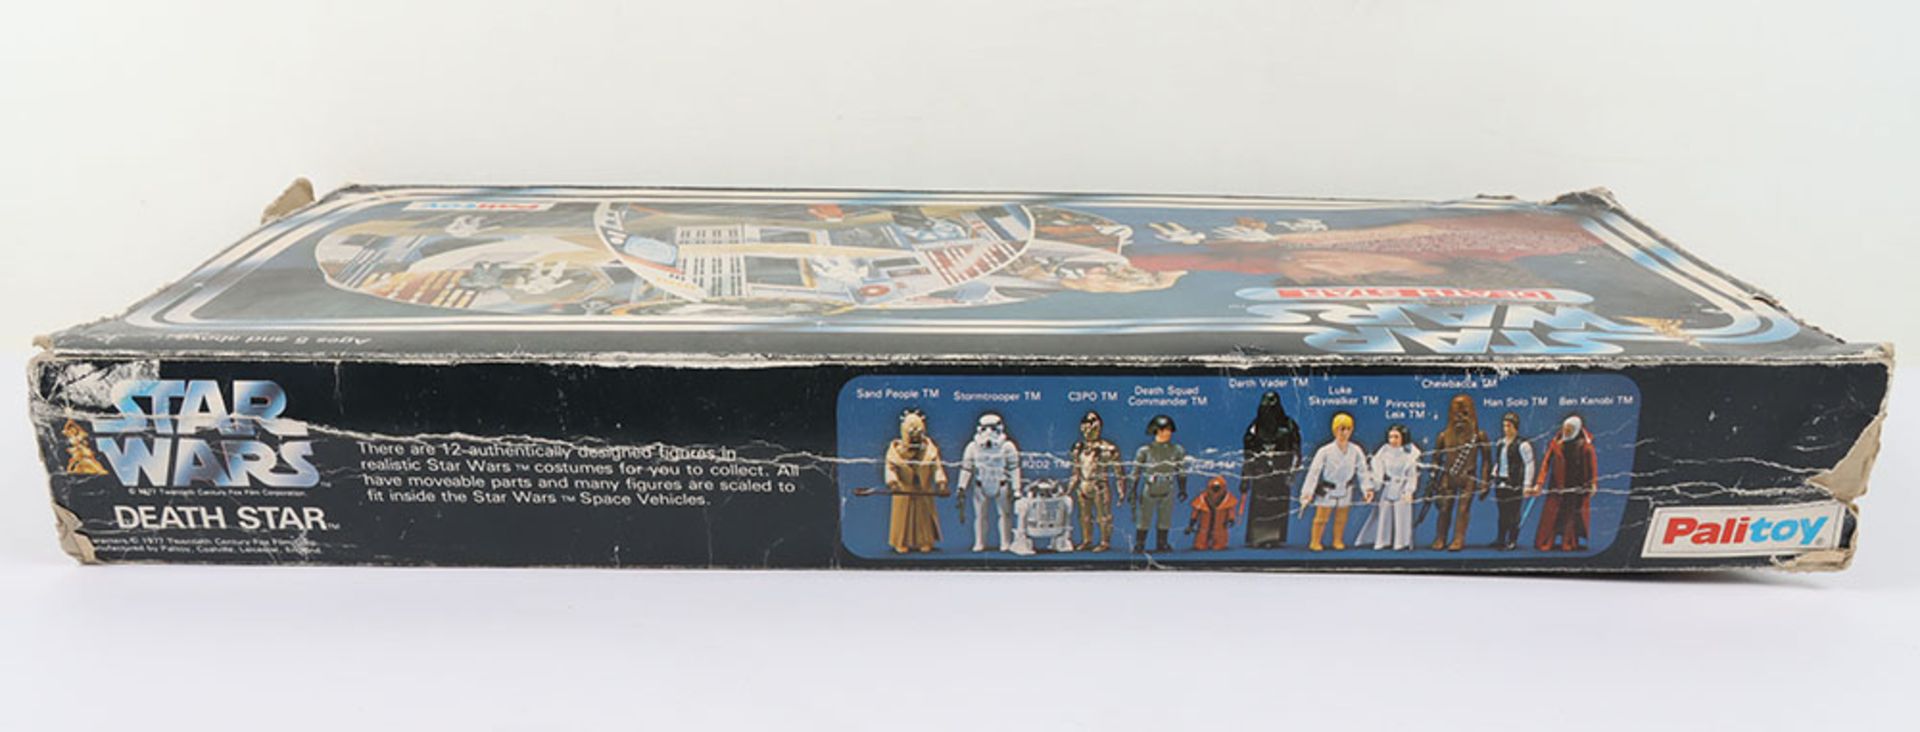 Scarce Palitoy Vintage Star Wars Death Star Play Centre - Image 8 of 12